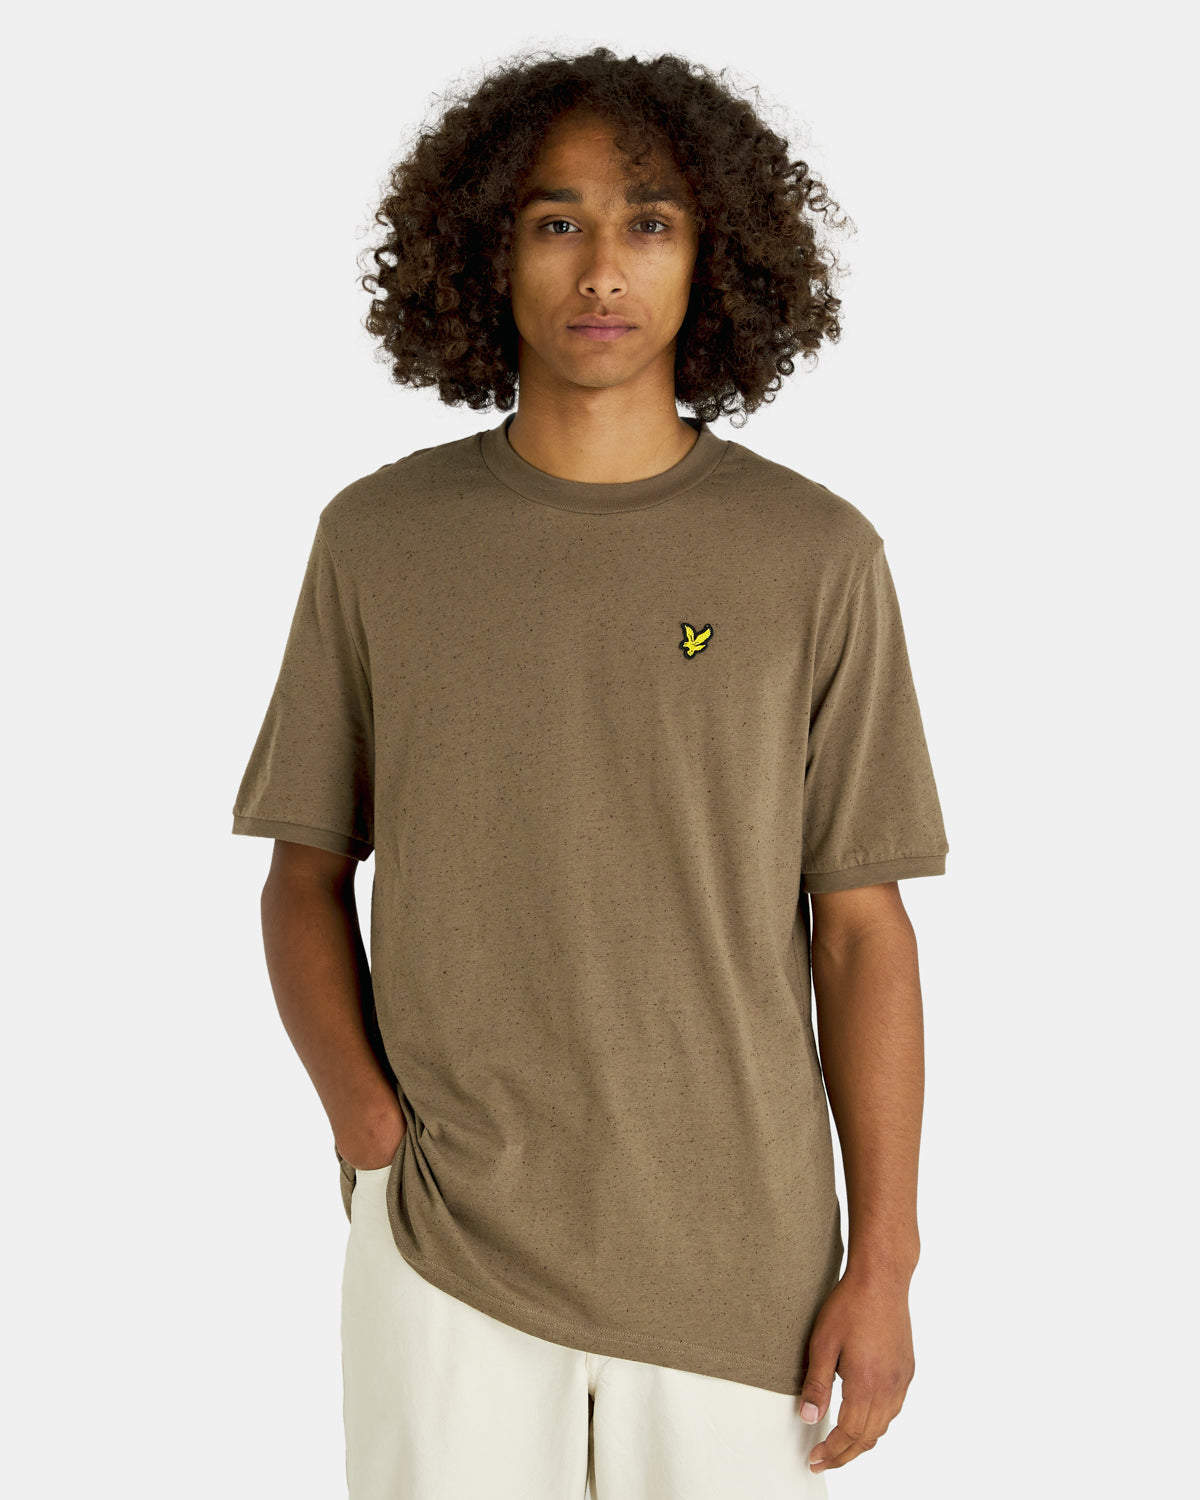 Lyle & Scott Mens Donegal T-Shirt Plus in Brown - 5XL product